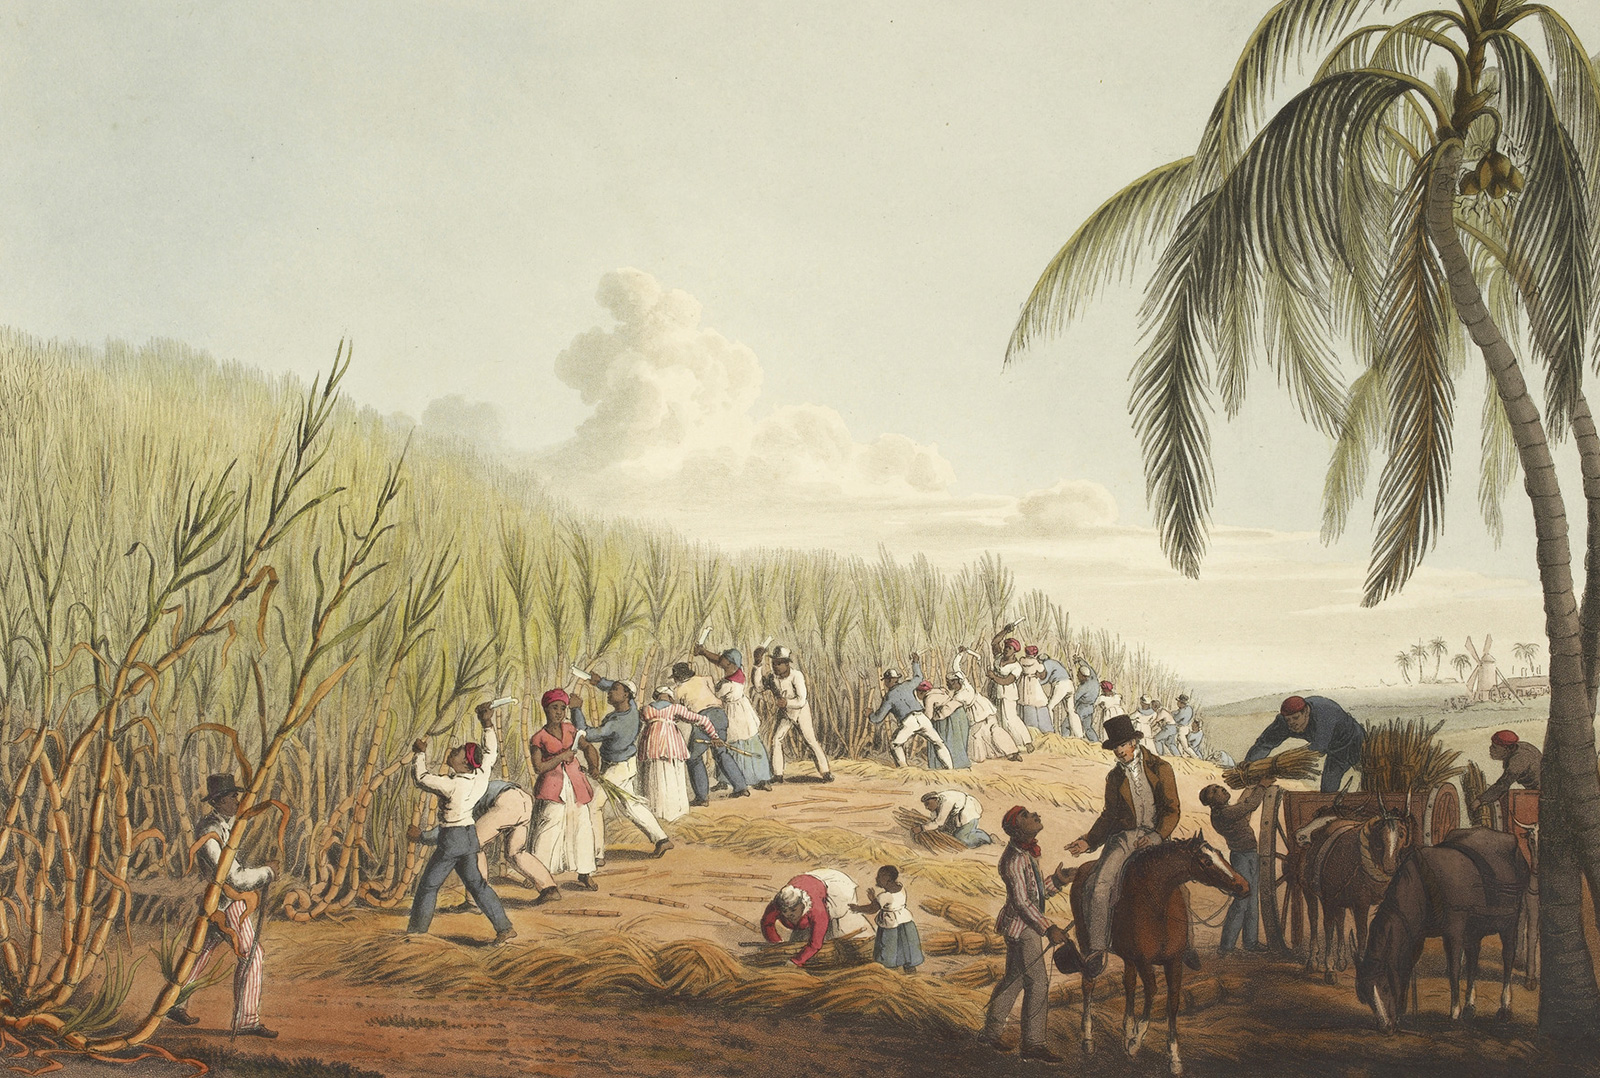 Enslaved people cutting sugarcane on the Caribbean island of Antigua, aquatint from Ten Views of the Island of Antigua by William Clark, 1832. Credits to: The British Library (Public Domain)